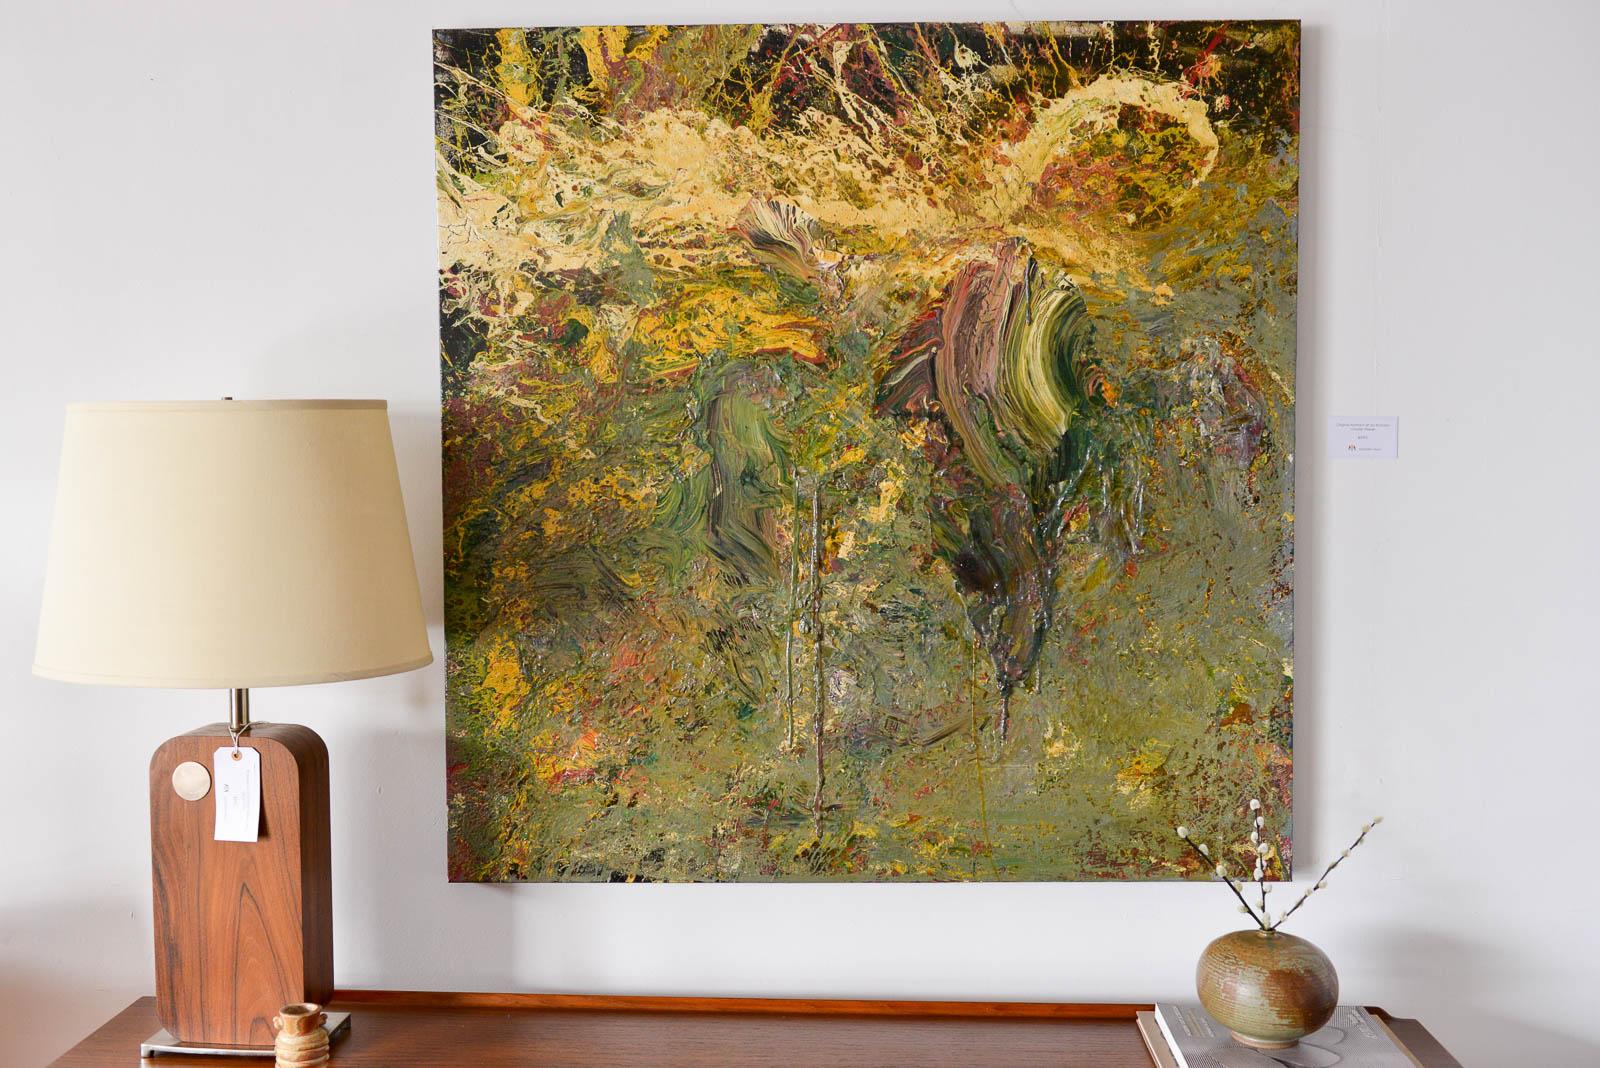 Large original abstract painting on canvas by Brandon Charles Weber. Signed by the artist on reverse, this beautiful piece is an original work and works well with mid century modern, modern and contemporary decor. Unframed and signed. Measures: 48